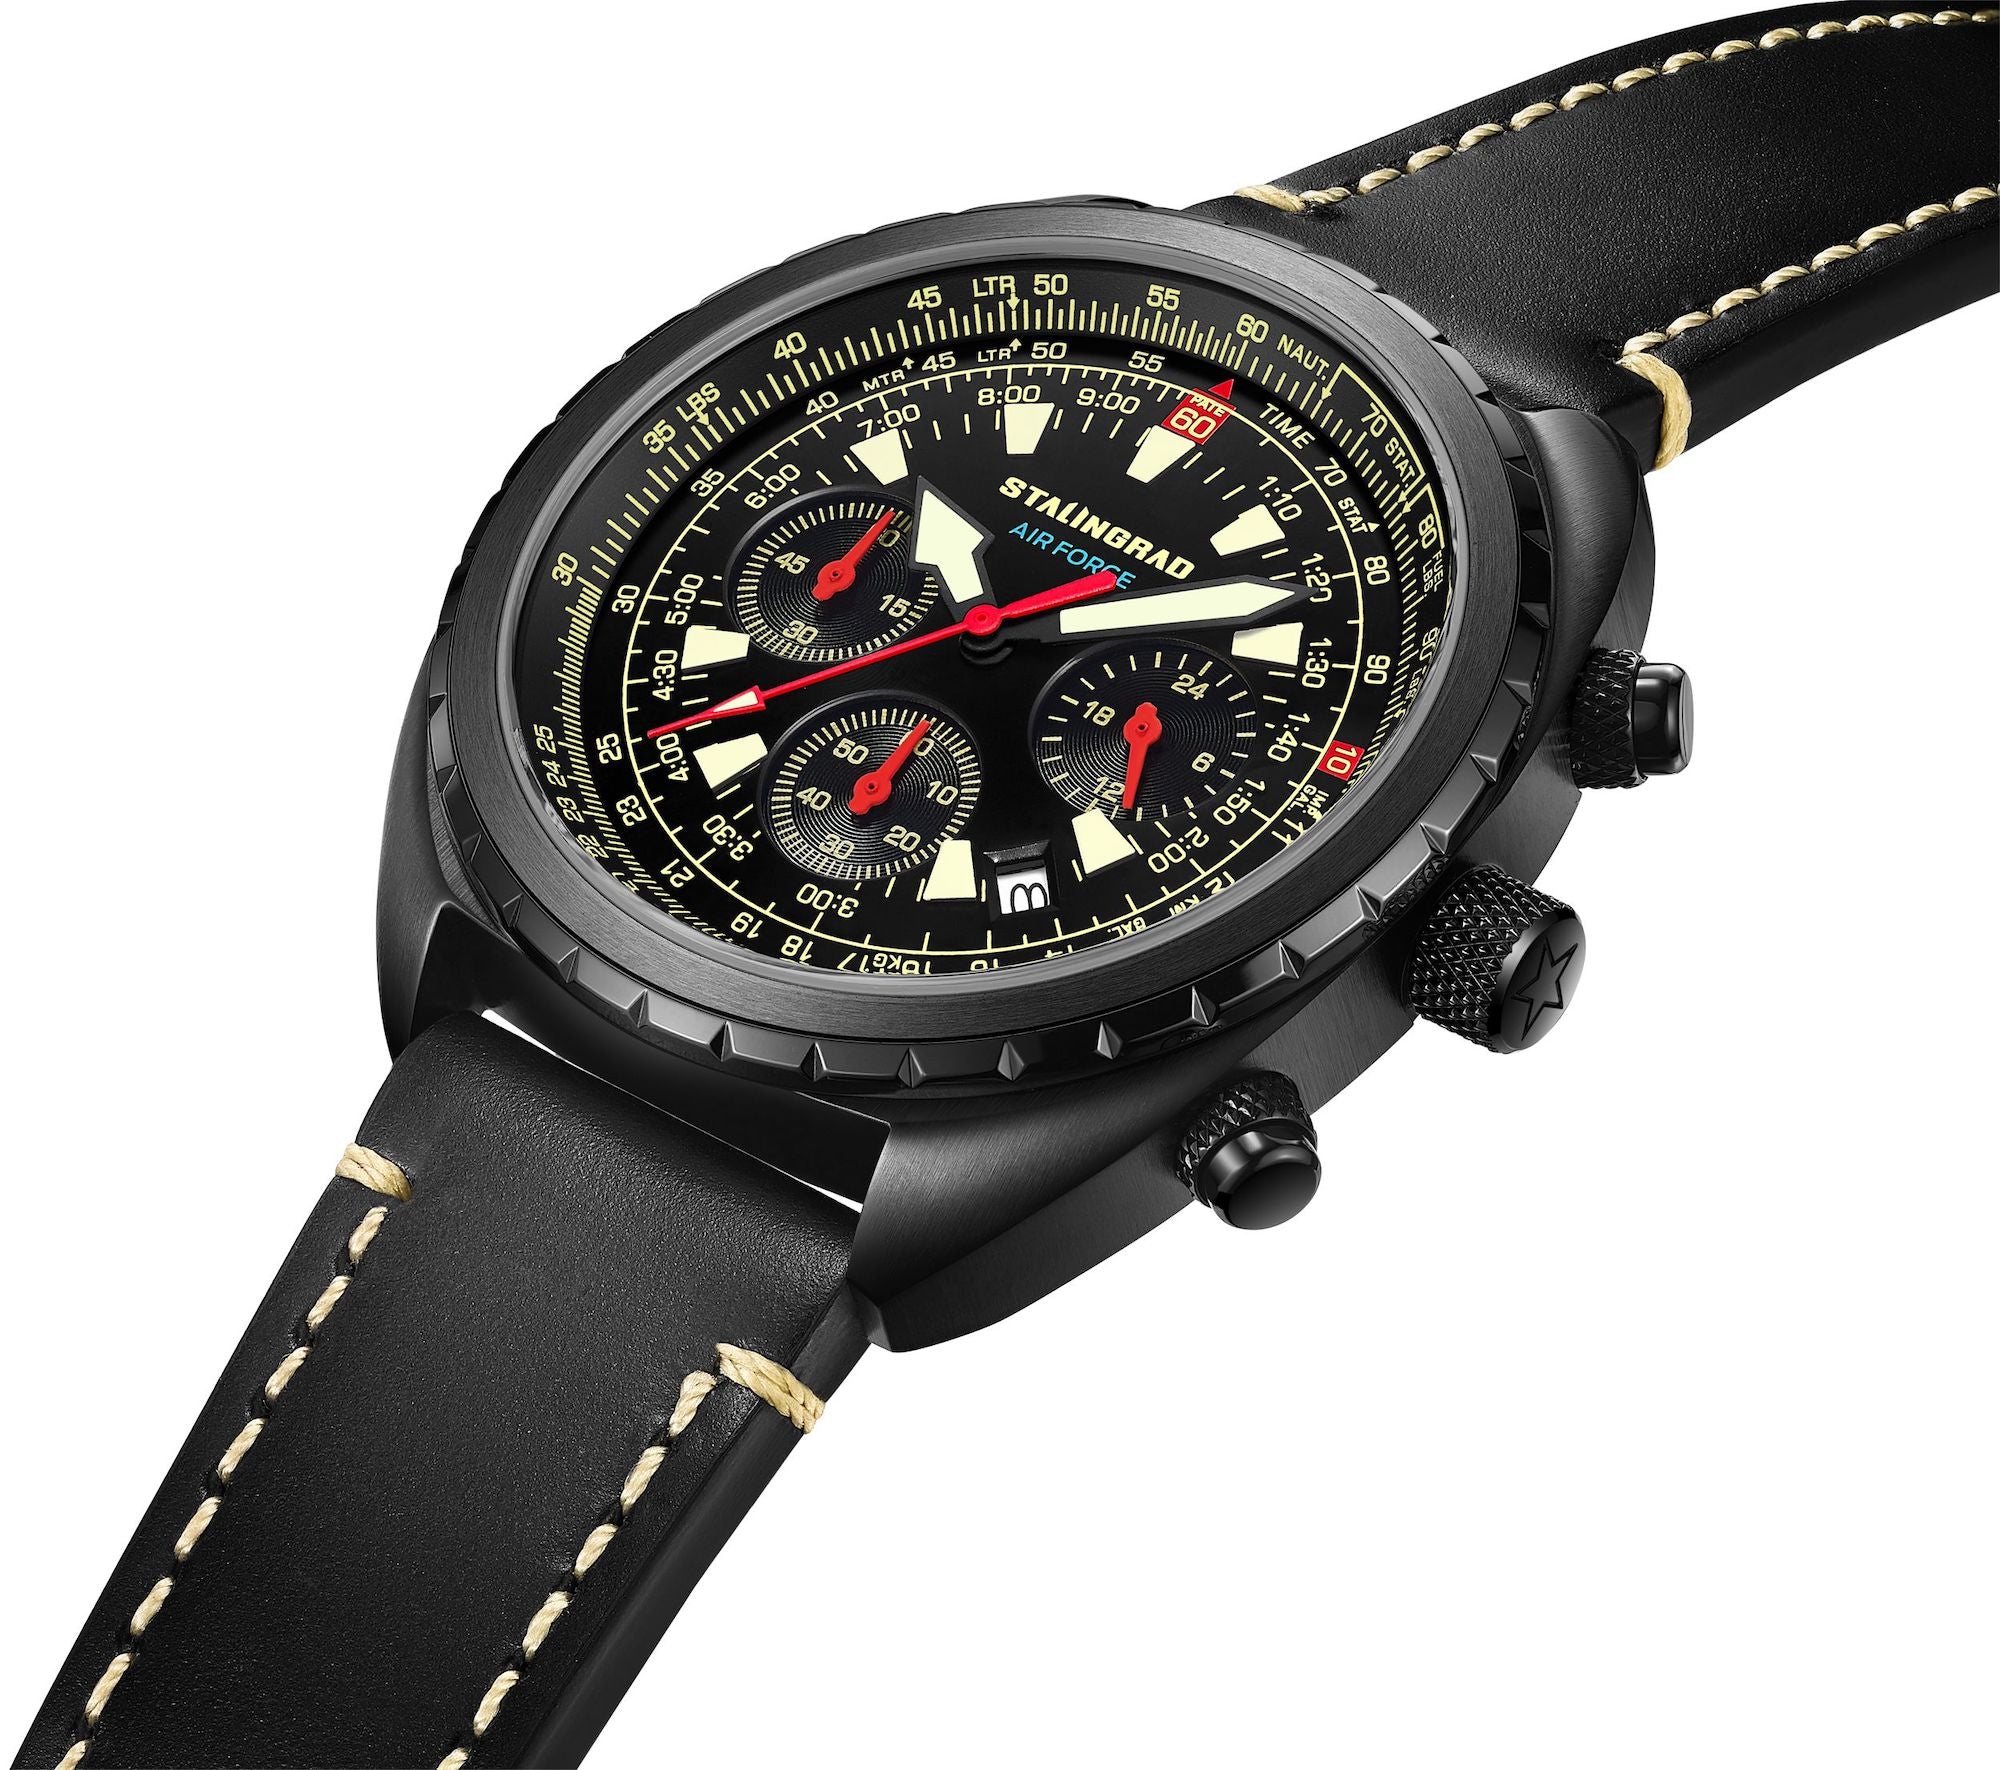 Stalingrad Novikov Chronograph watch with a black dial, black bezel, yellow hour markers and hands with a date window at 4 o'clock on black leather strap diagonal view on a white background